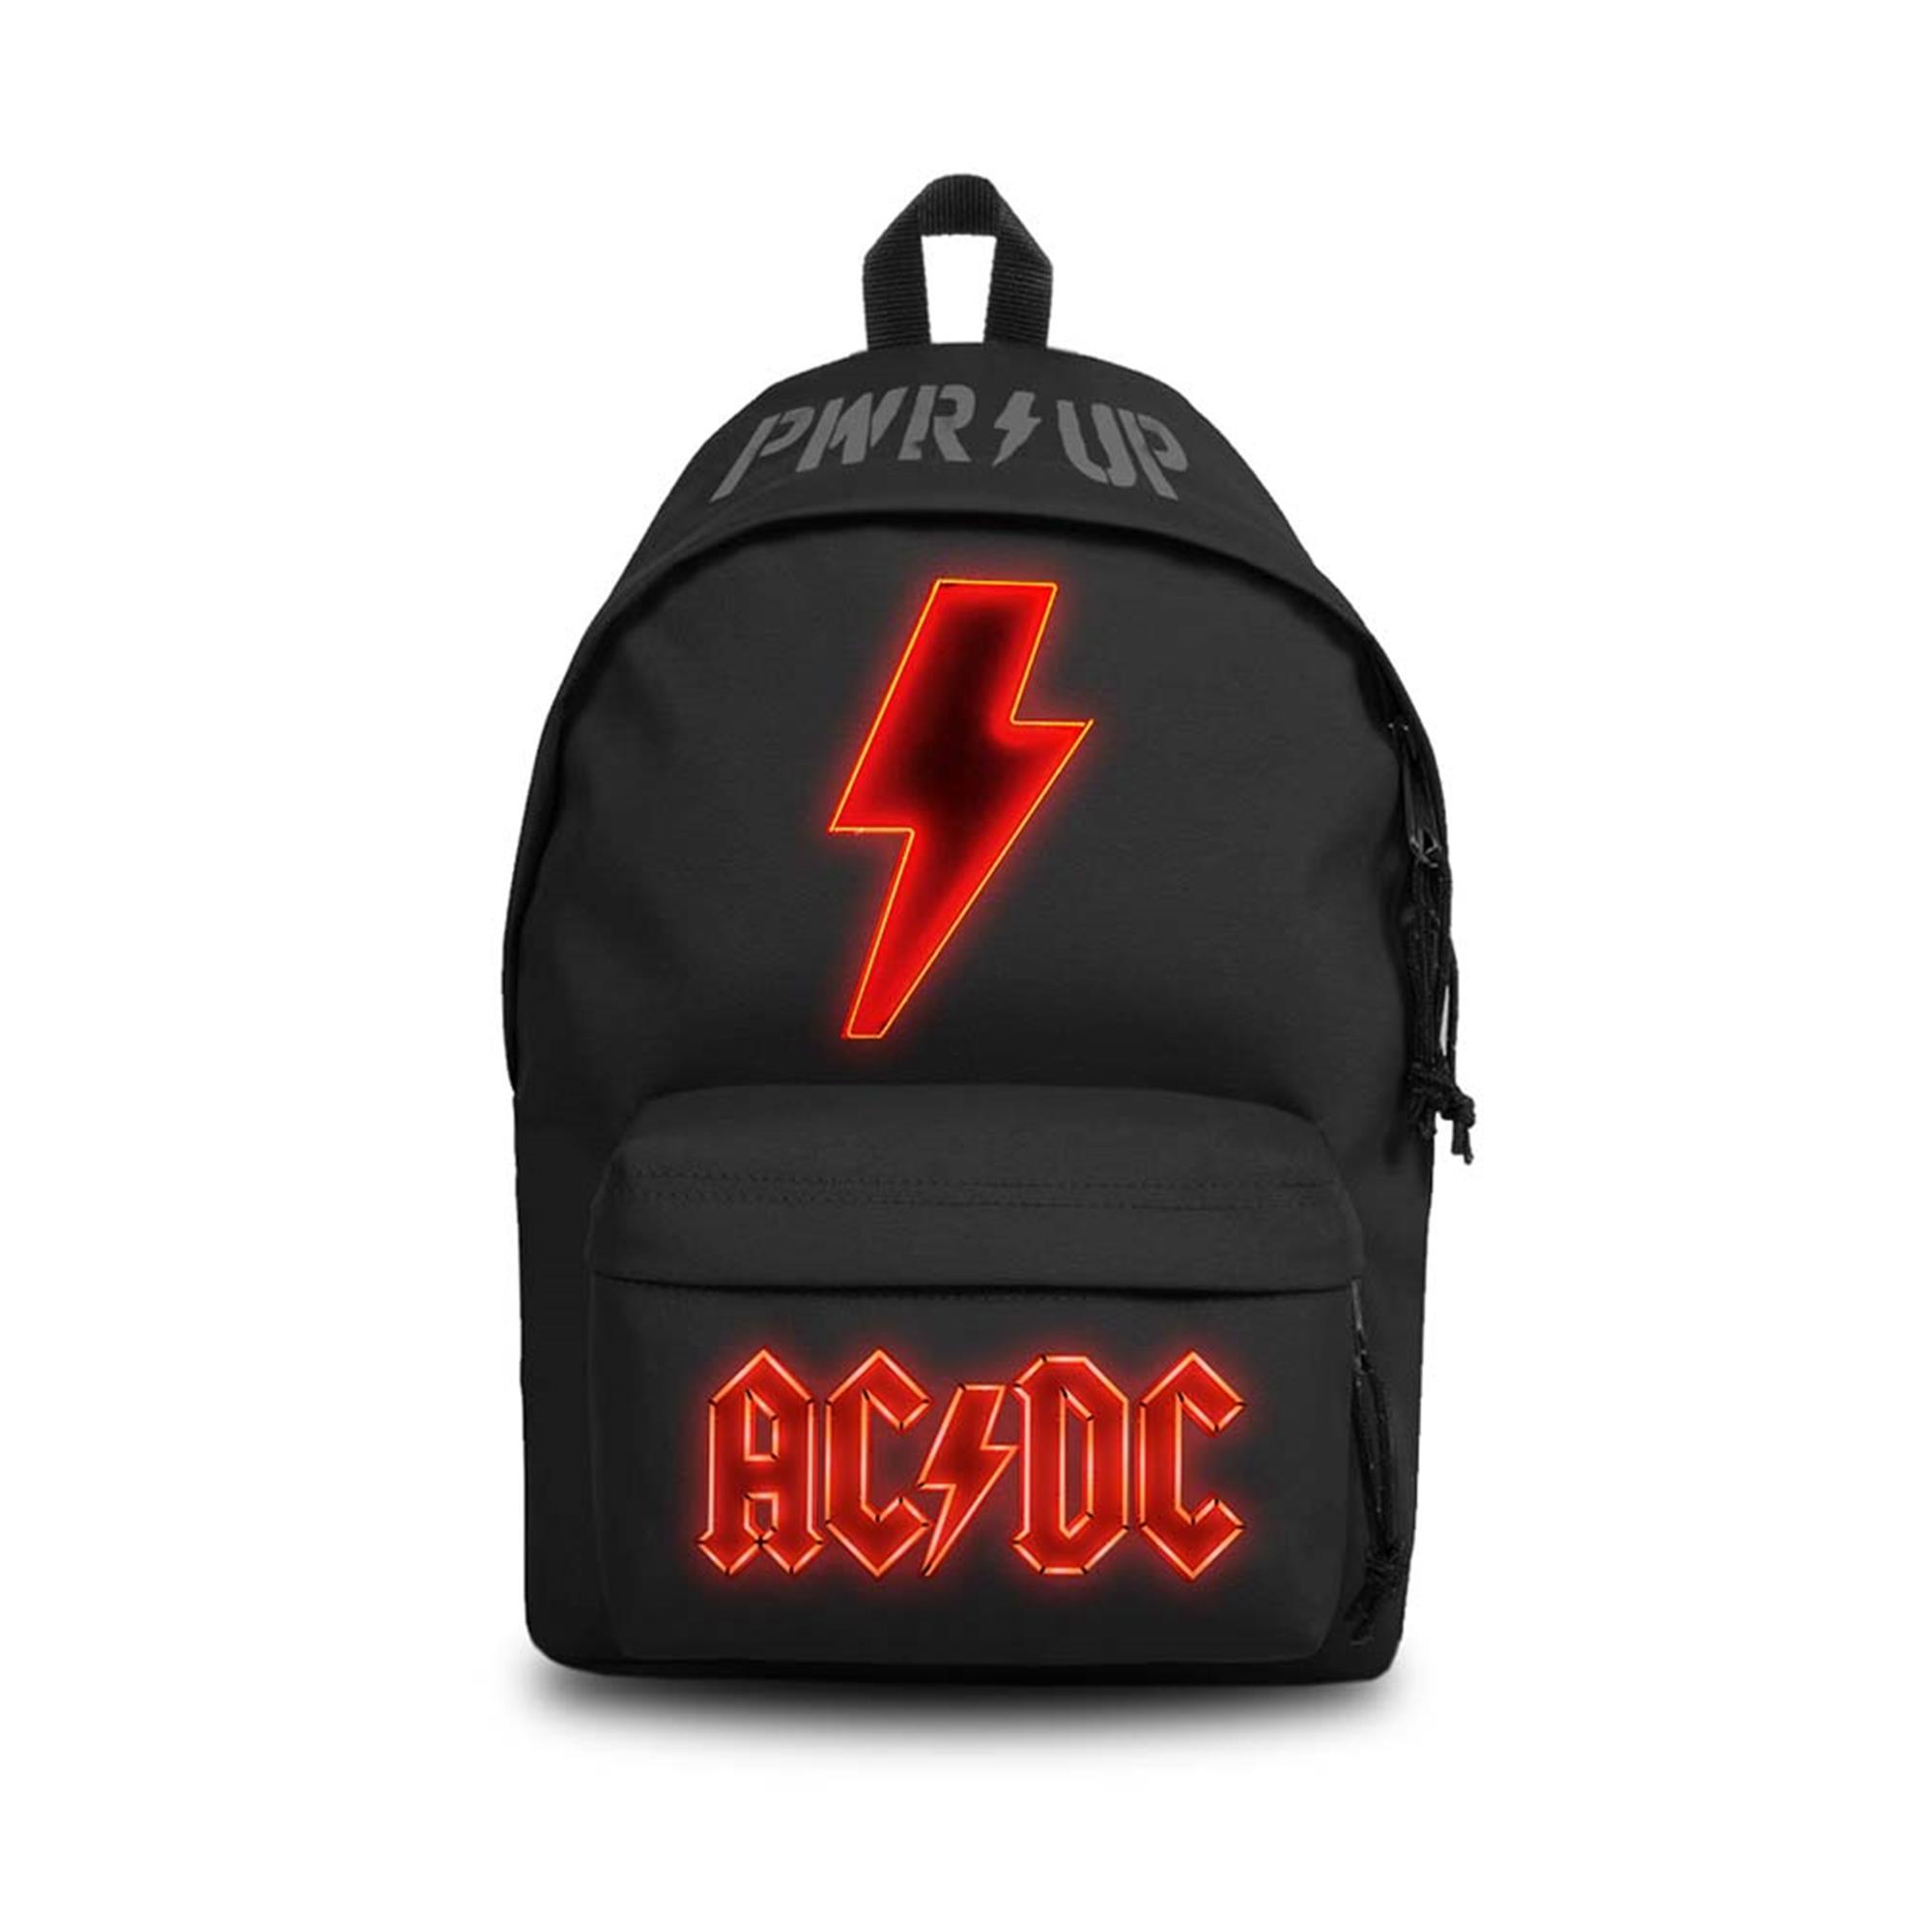 AC/DC Pwr Up 1 Daypack